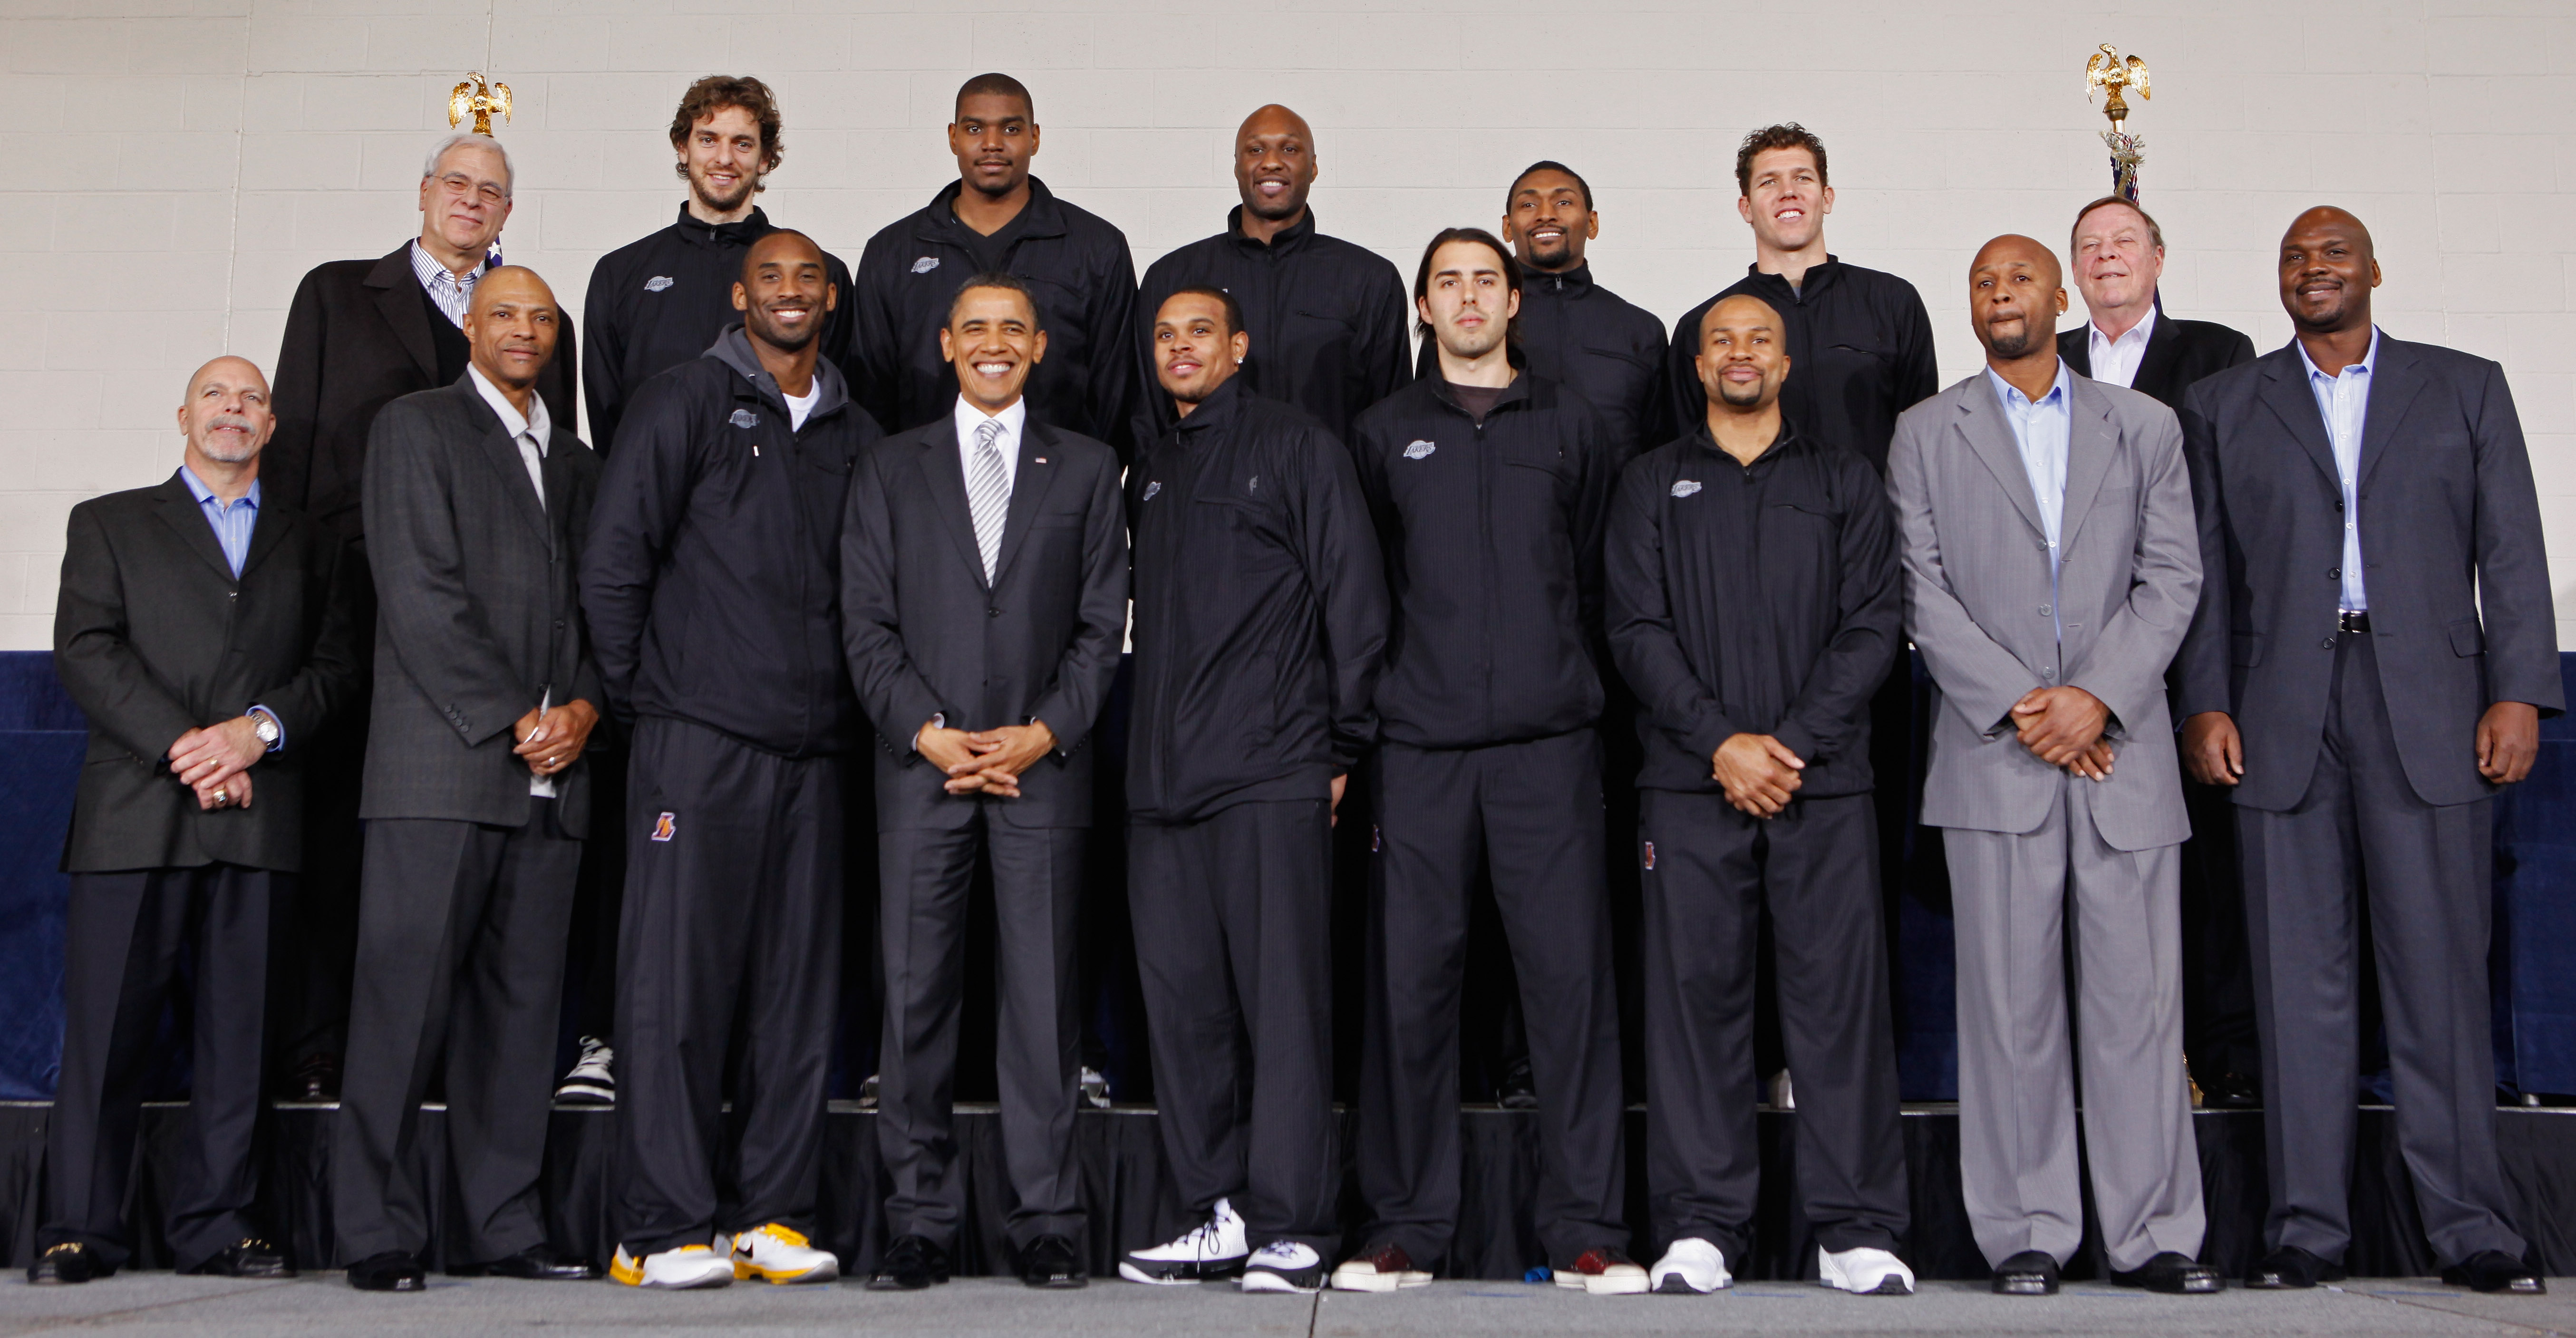 WASHINGTON, DC - DECEMBER 13:  (AFP OUT) U.S. President Barack Obama (Bottom row 4L)) poses for photographs with members of the 2010 NBA Championship Los Angeles Lakers during an event at the Boys and Girls Club at THEARC   December 13, 2010 in Washington